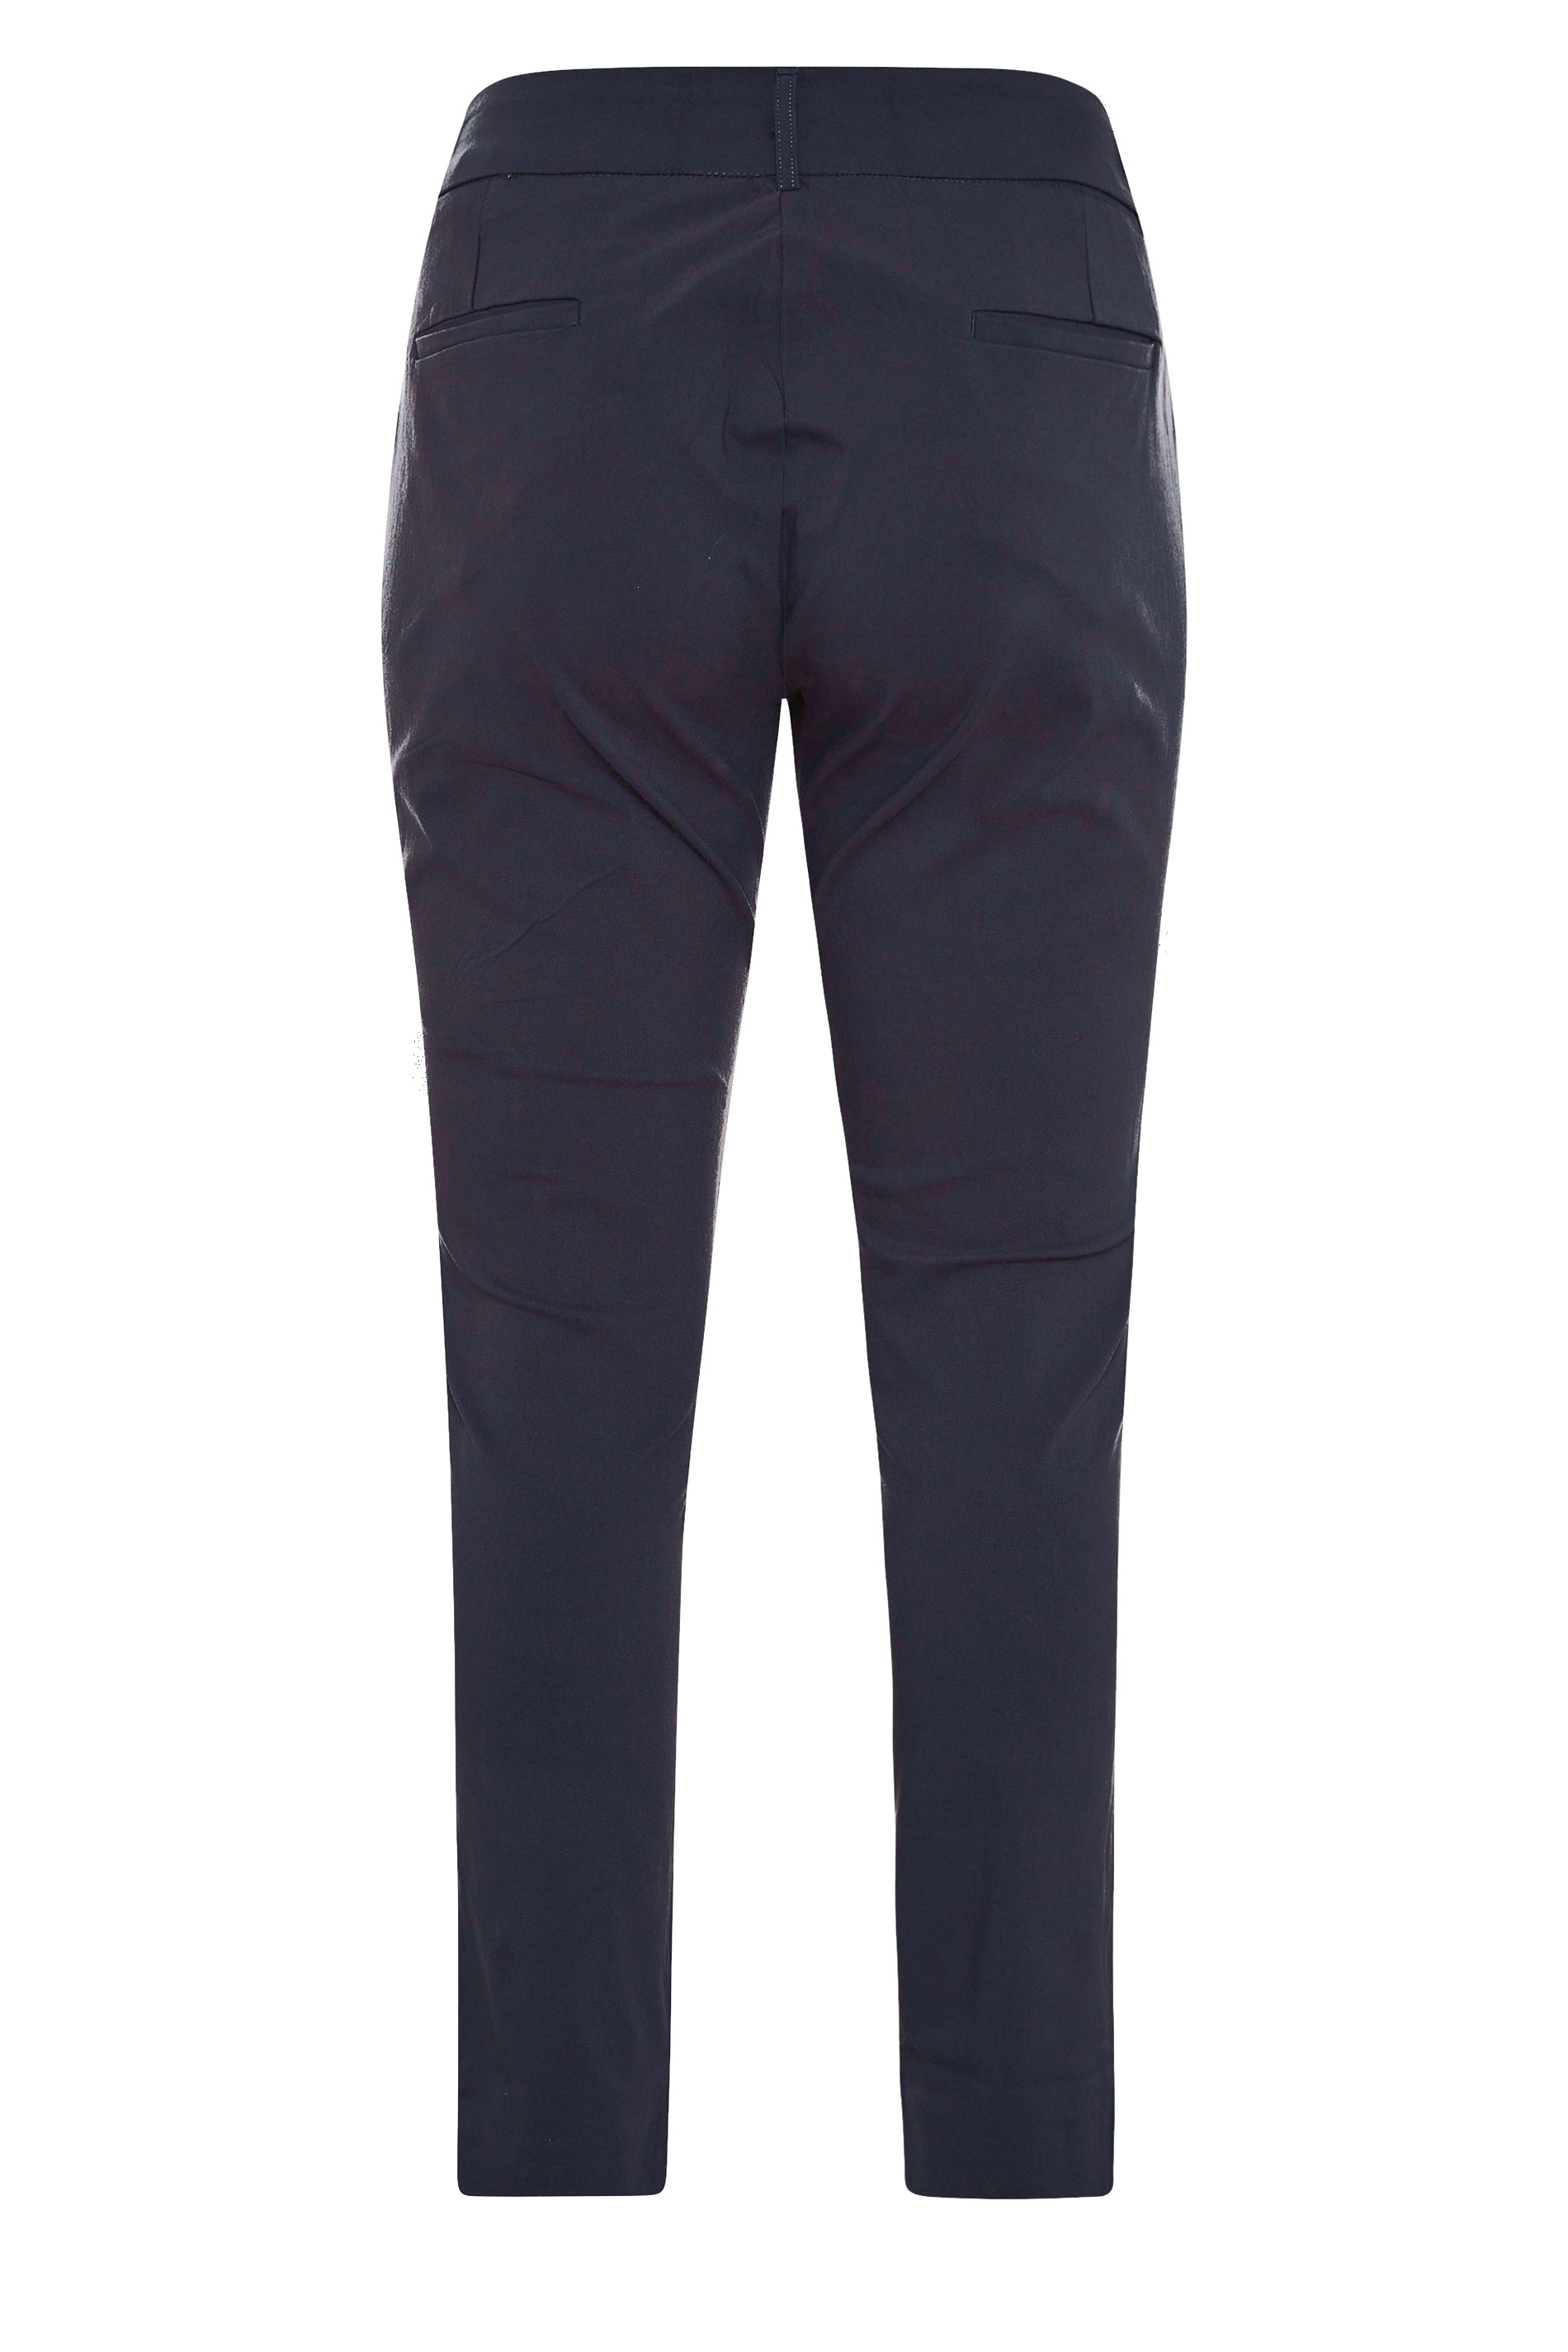 Navy Blue Stretch Bengaline Trousers | Yours Clothing